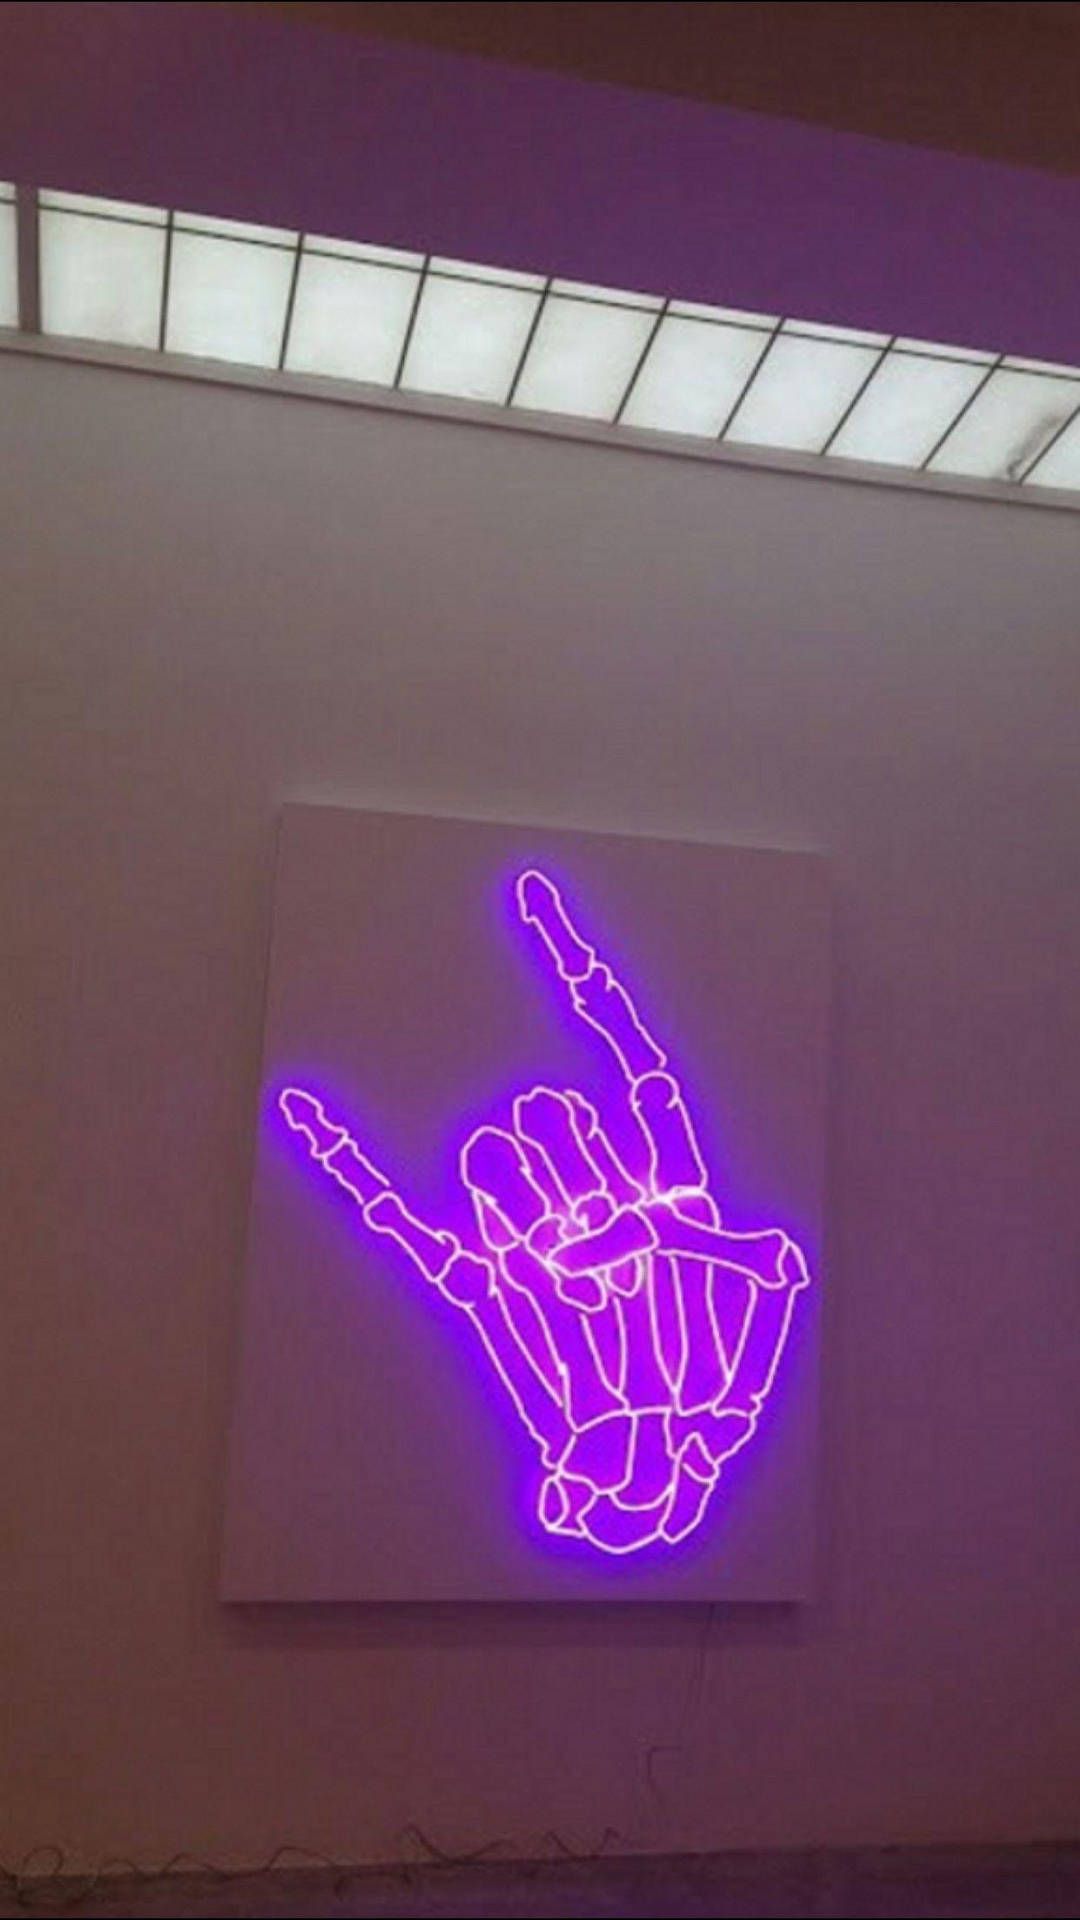 A purple neon sign that is on the wall - Rock